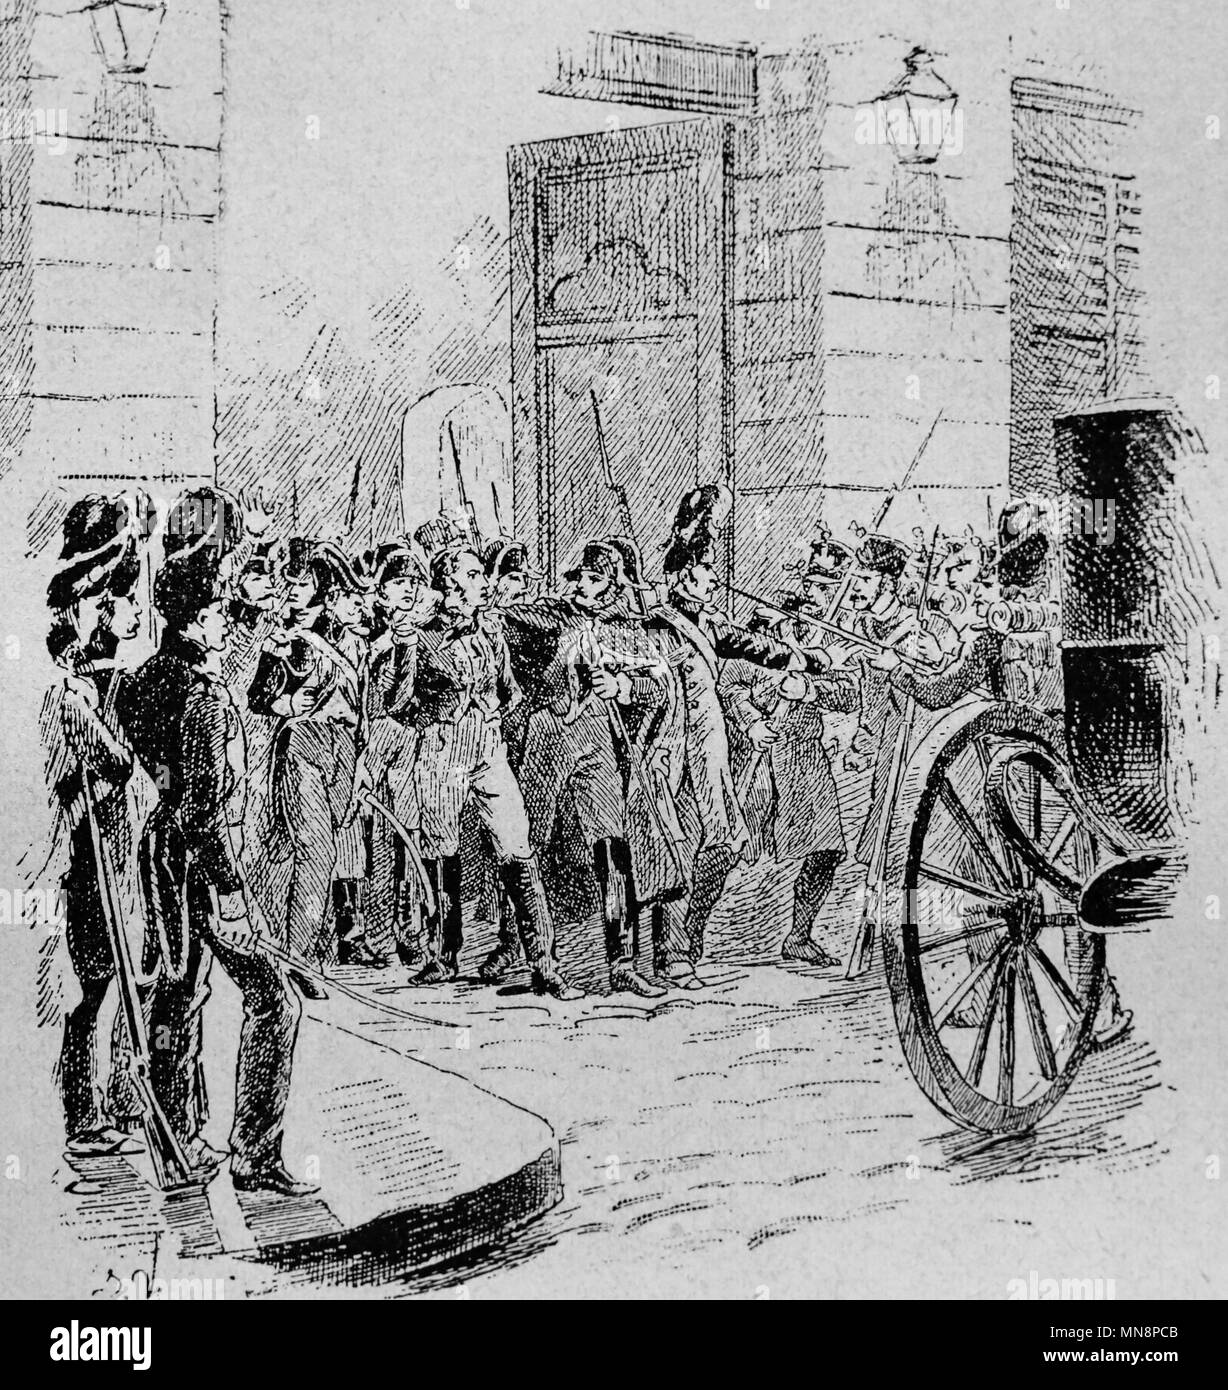 The Malet coup of 1812, Paris, France. Aimed at removing Napoleon I. The Coup failedand. Arrest of Malet. Engraving. Stock Photo